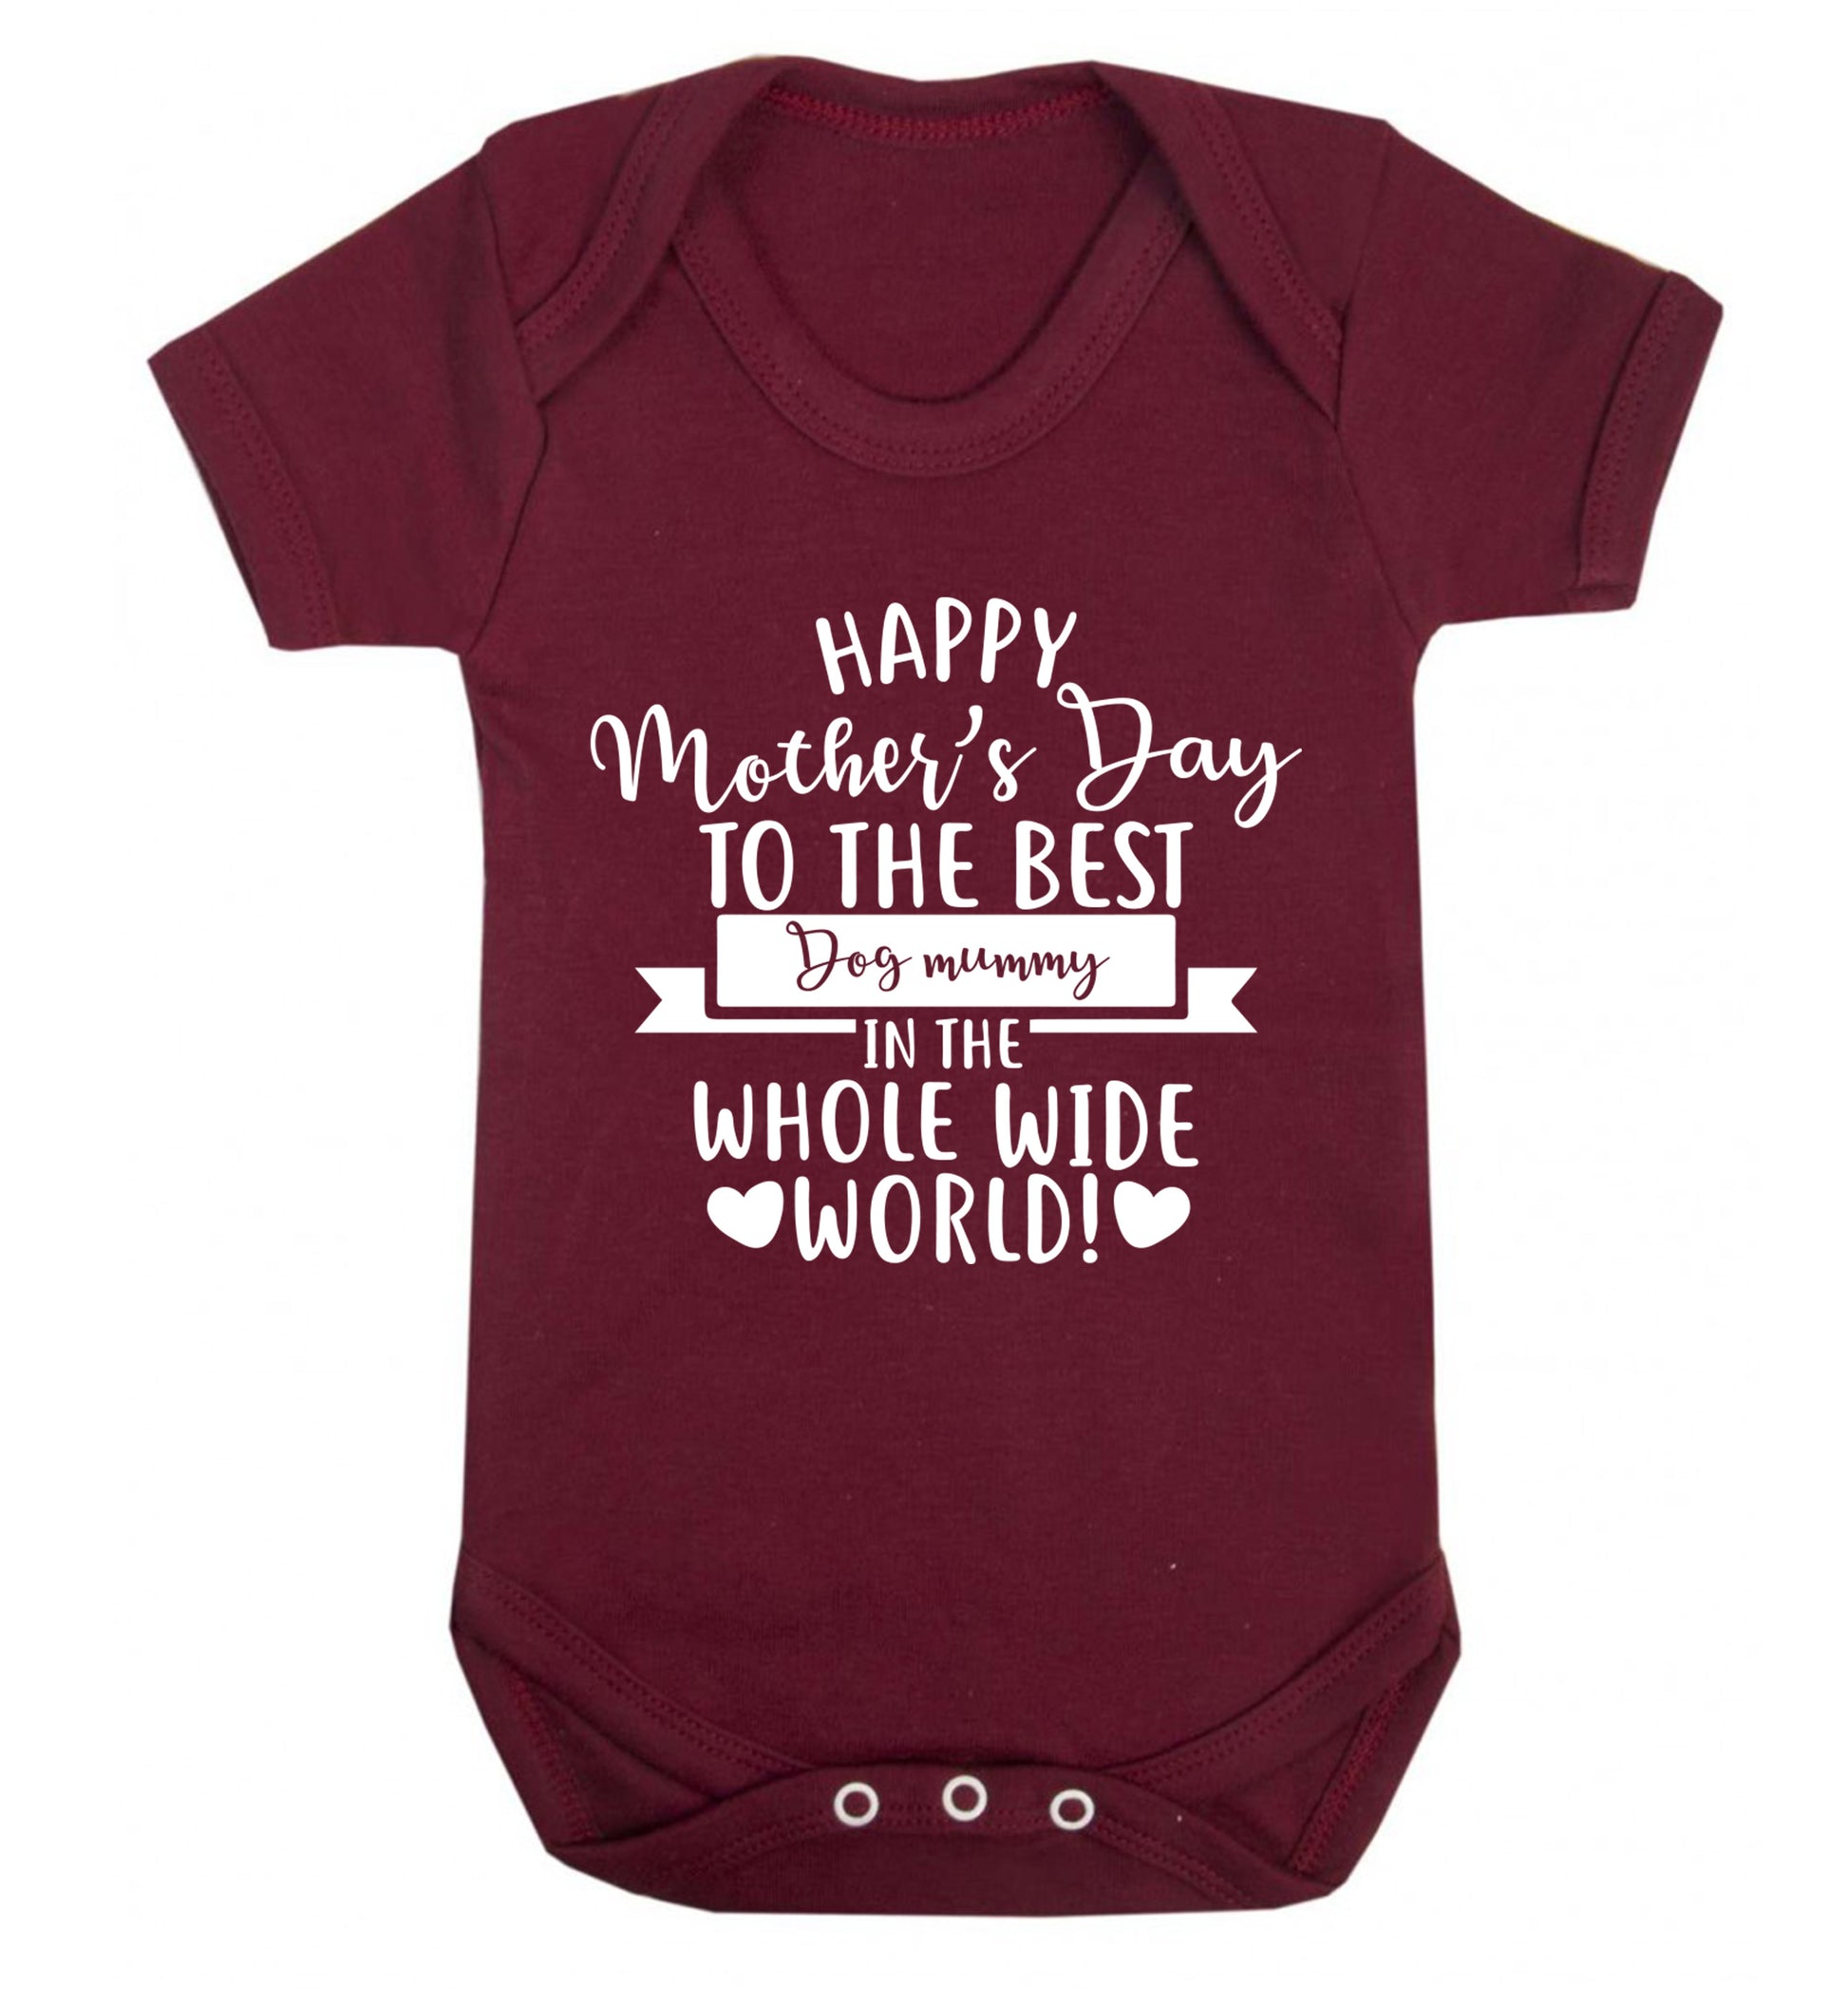 Happy mother's day to the best dog mummy in the world Baby Vest maroon 18-24 months